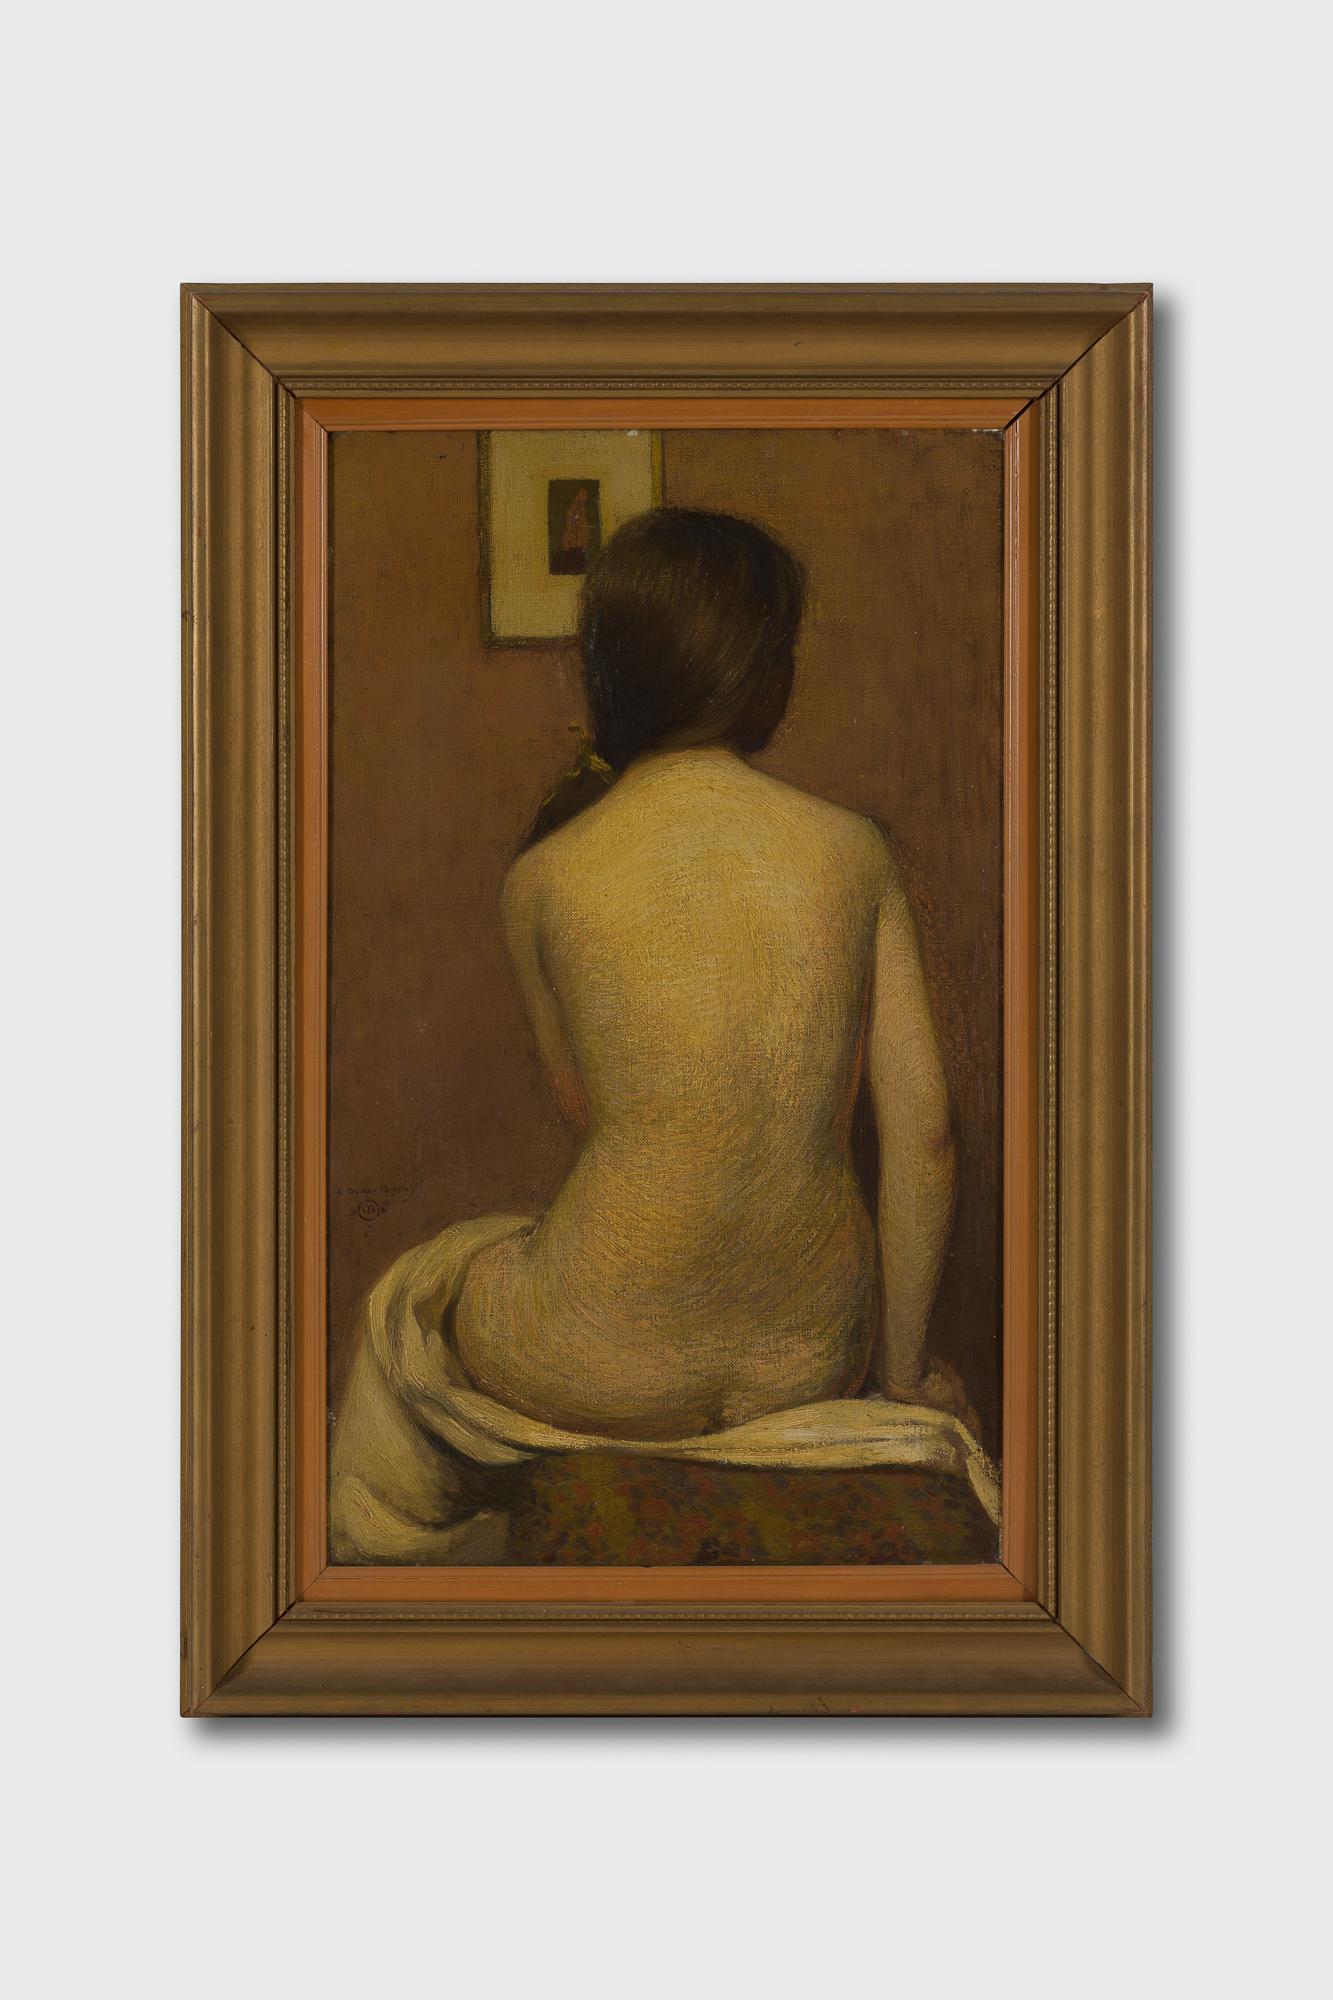 [Nude Woman Viewed from Behind] - Painting by Hermann Dudley Murphy